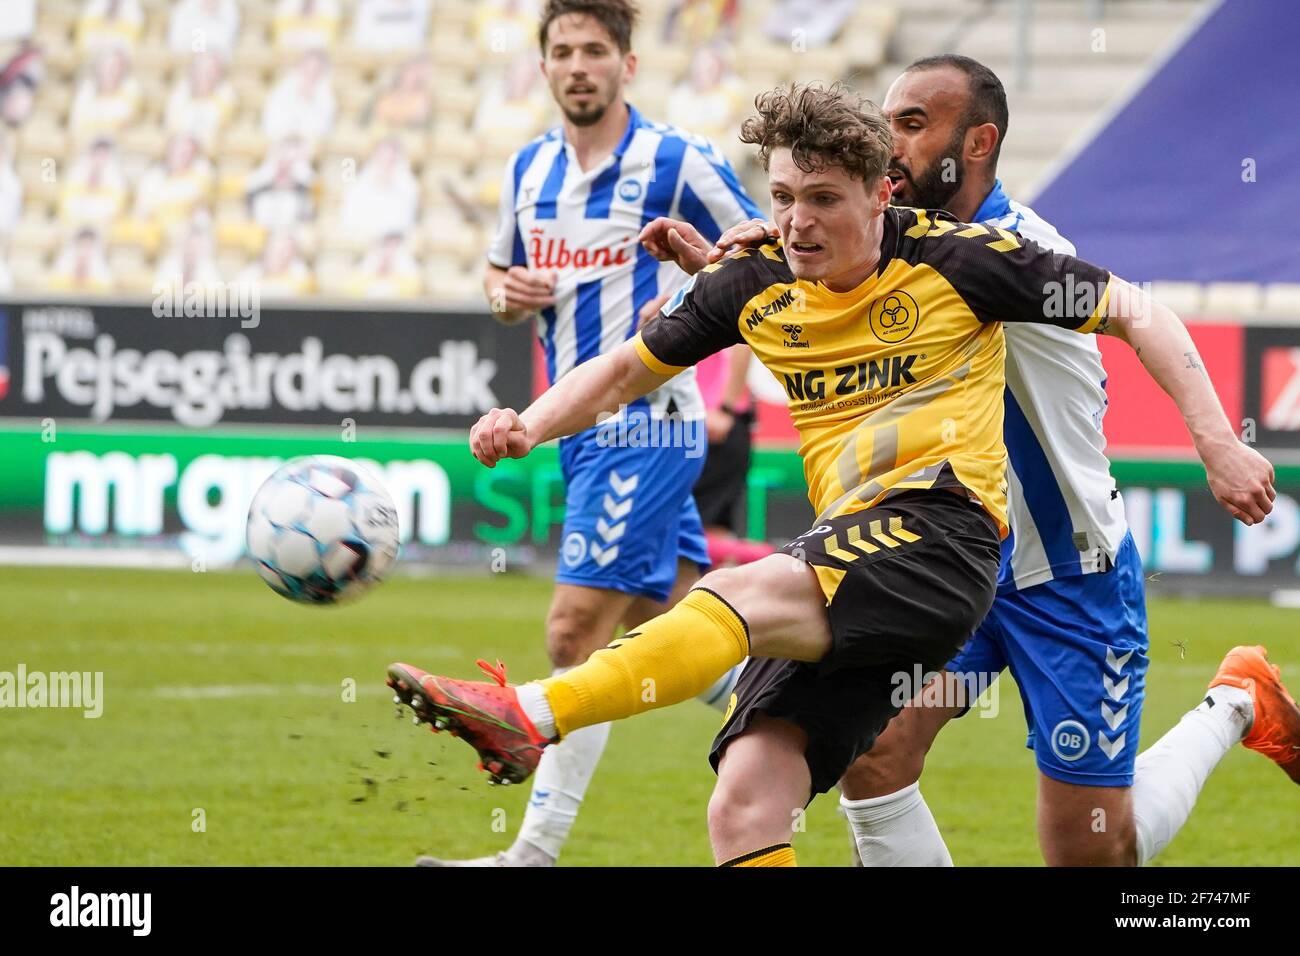 Horsens, Denmark. 04th Apr, 2021. Nikolas Dyhr (6) of AC Horsens during the 3F Superliga match between AC Horsens and Odense Boldklub at Casa Arena in Horsens. (Photo Credit: Gonzales Photo/Alamy